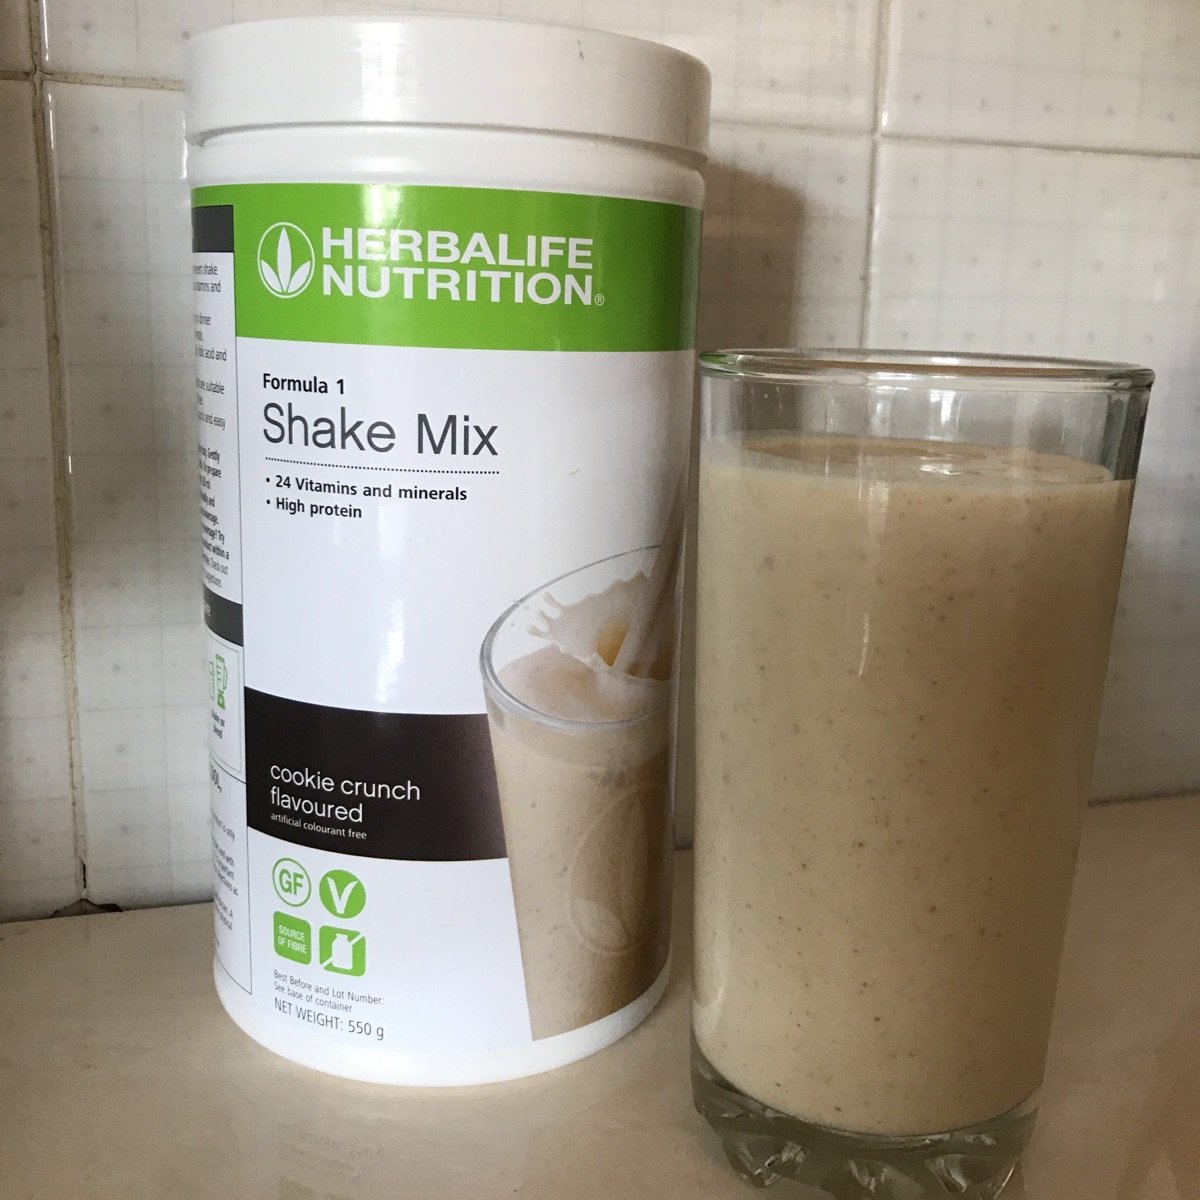 Herbalife Nutrition Formula 1 - Cookie Crunch Reviews | abillion